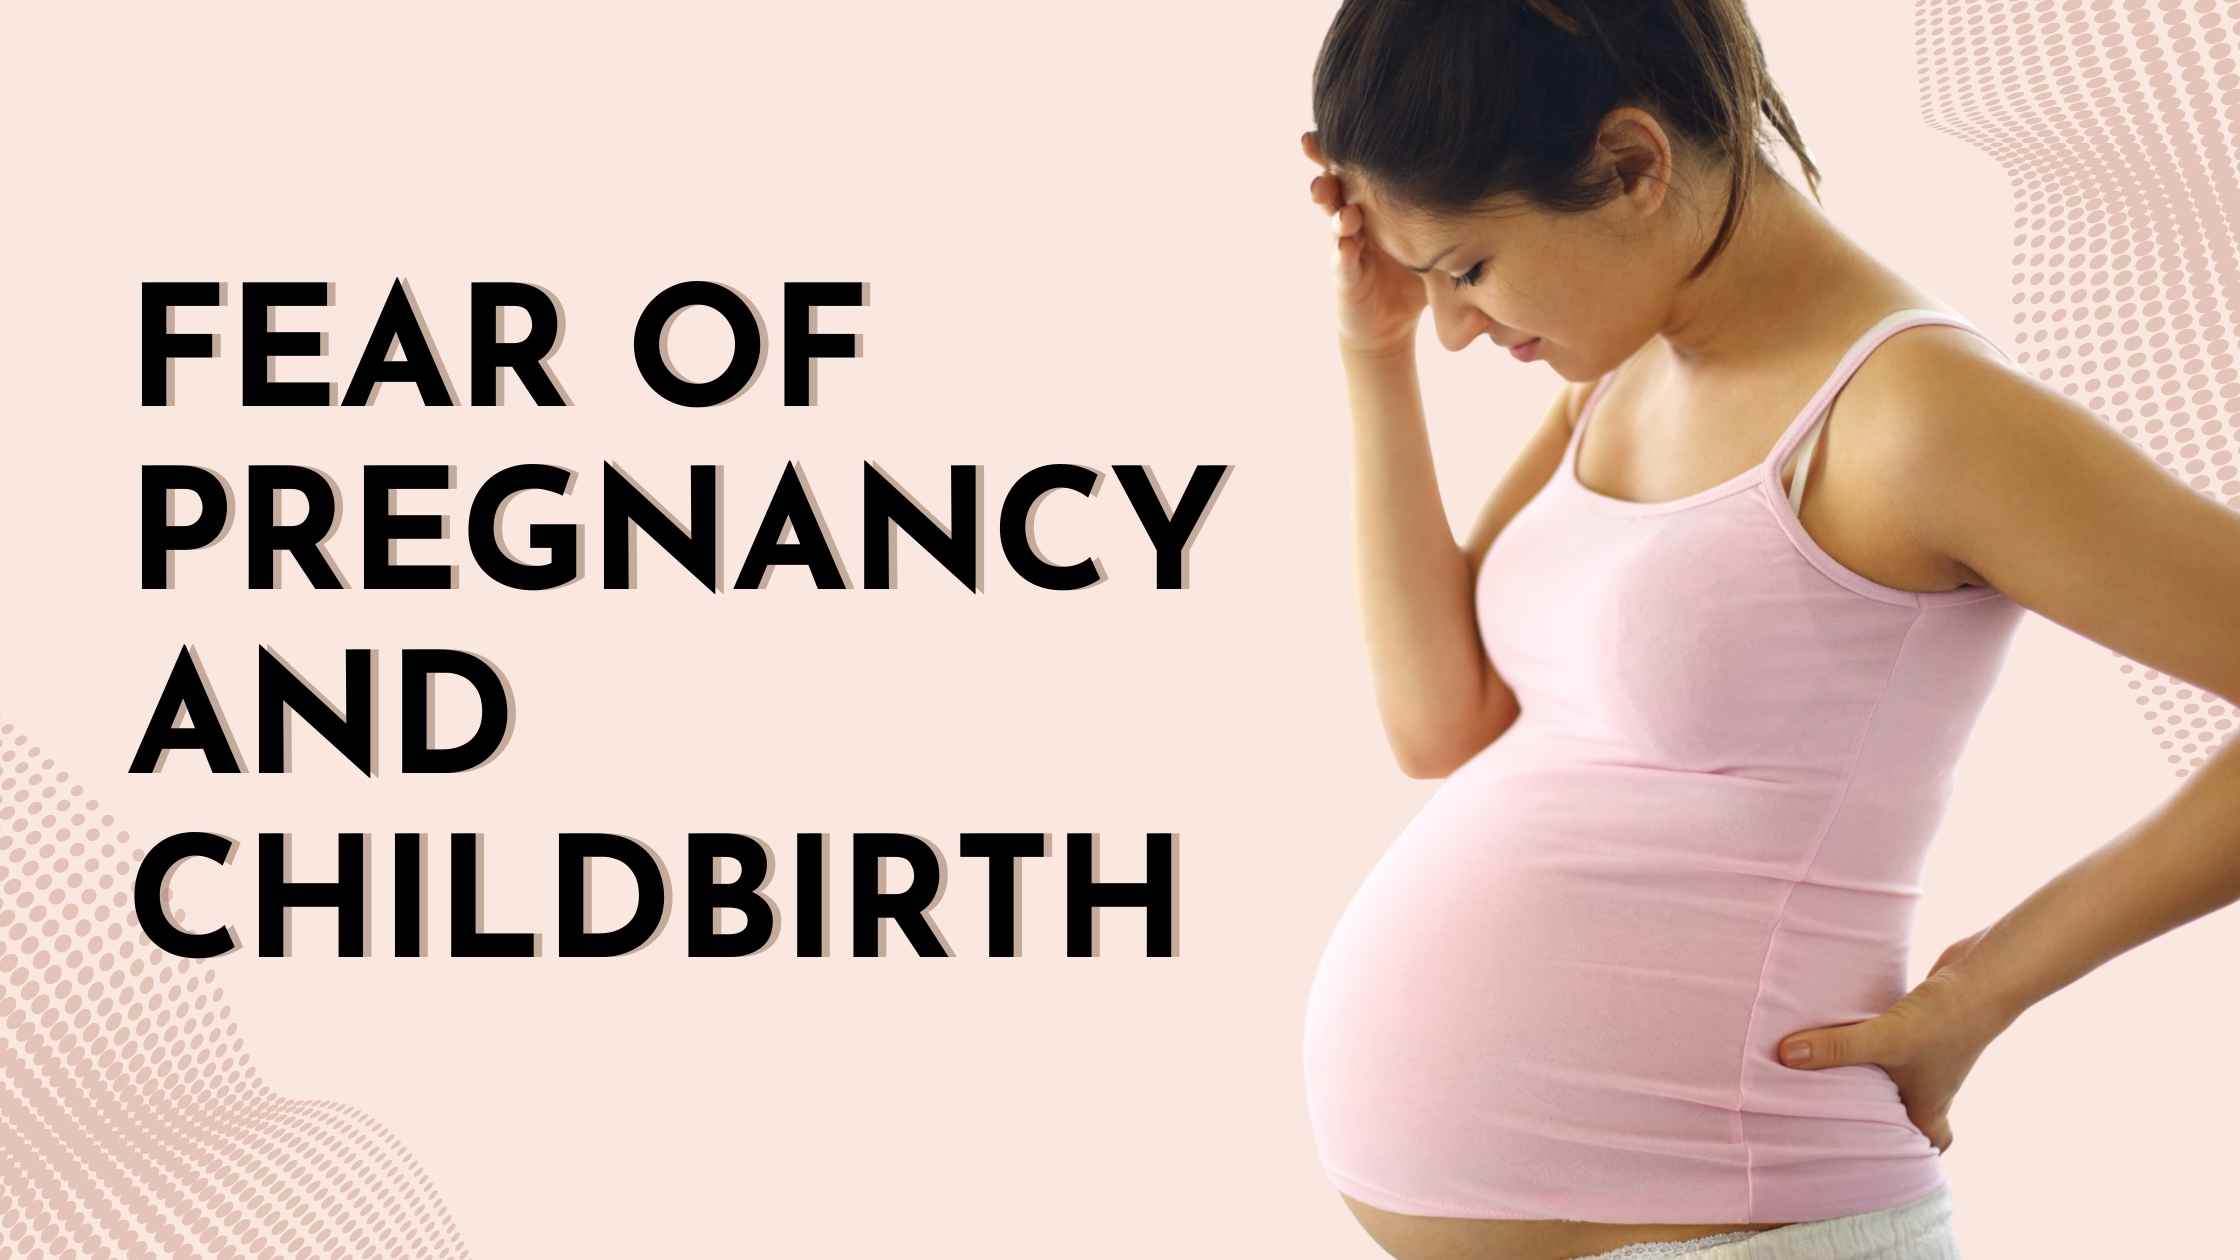 Fear of pregnancy and childbirth